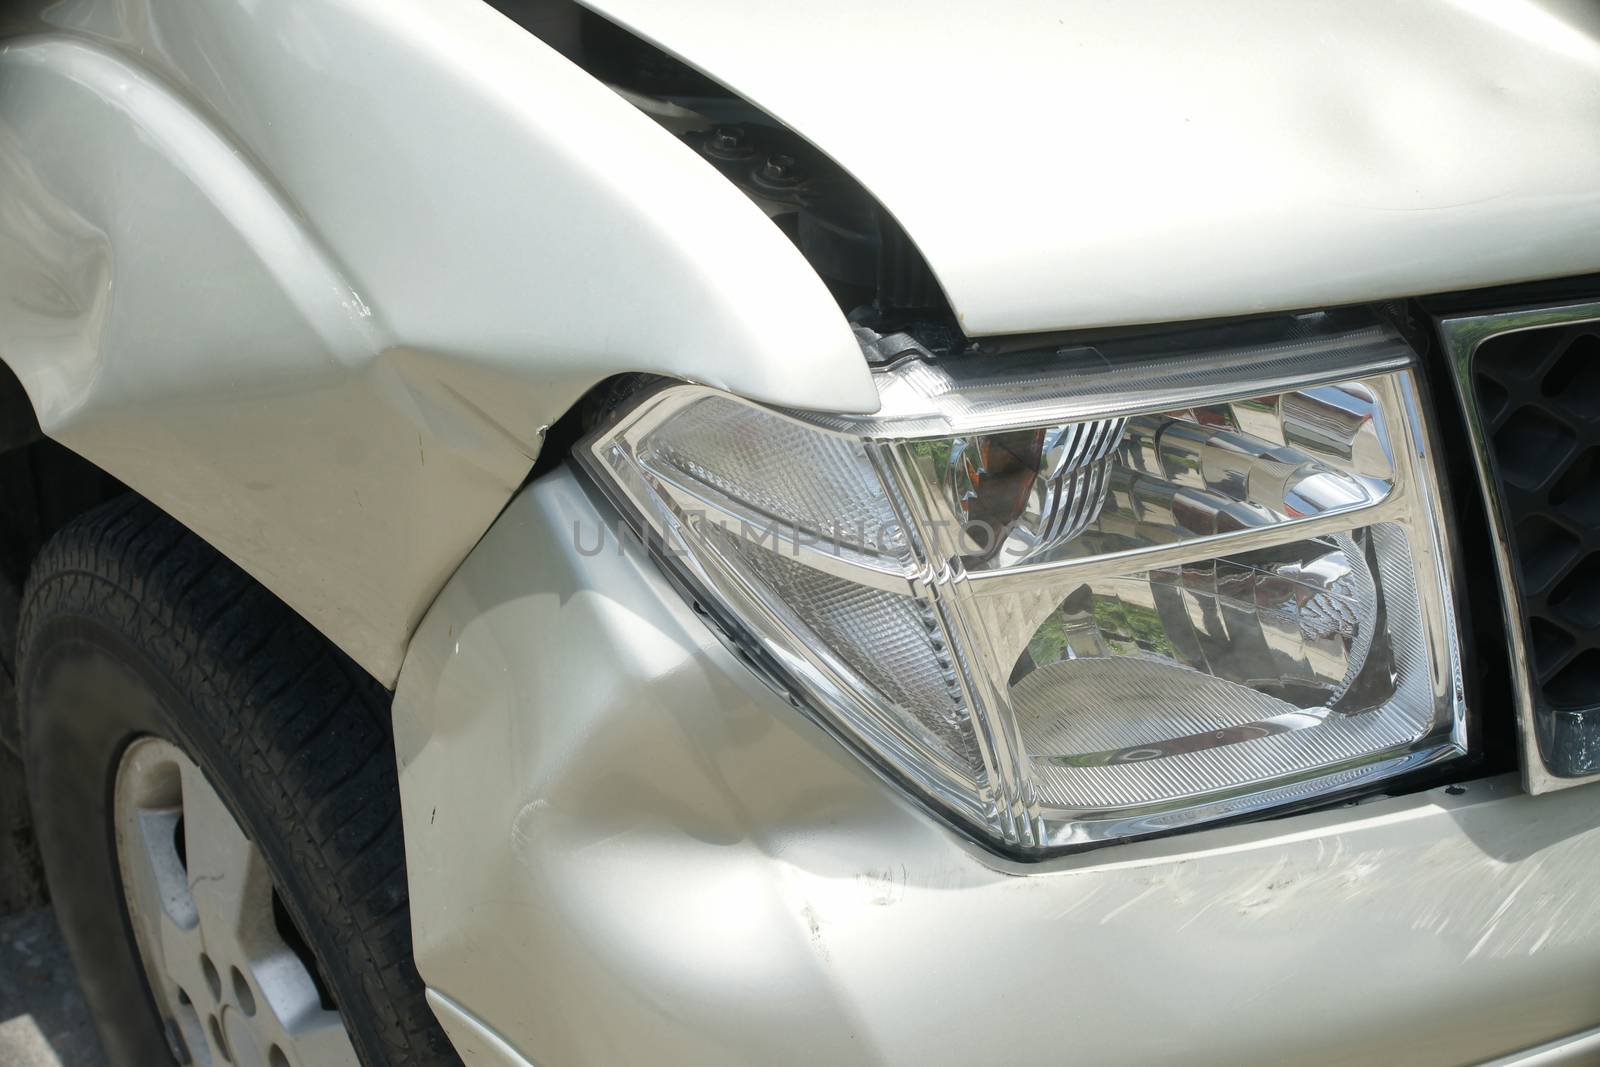 A dent on the right front of a pickup truck (damage from crash accident) by mranucha